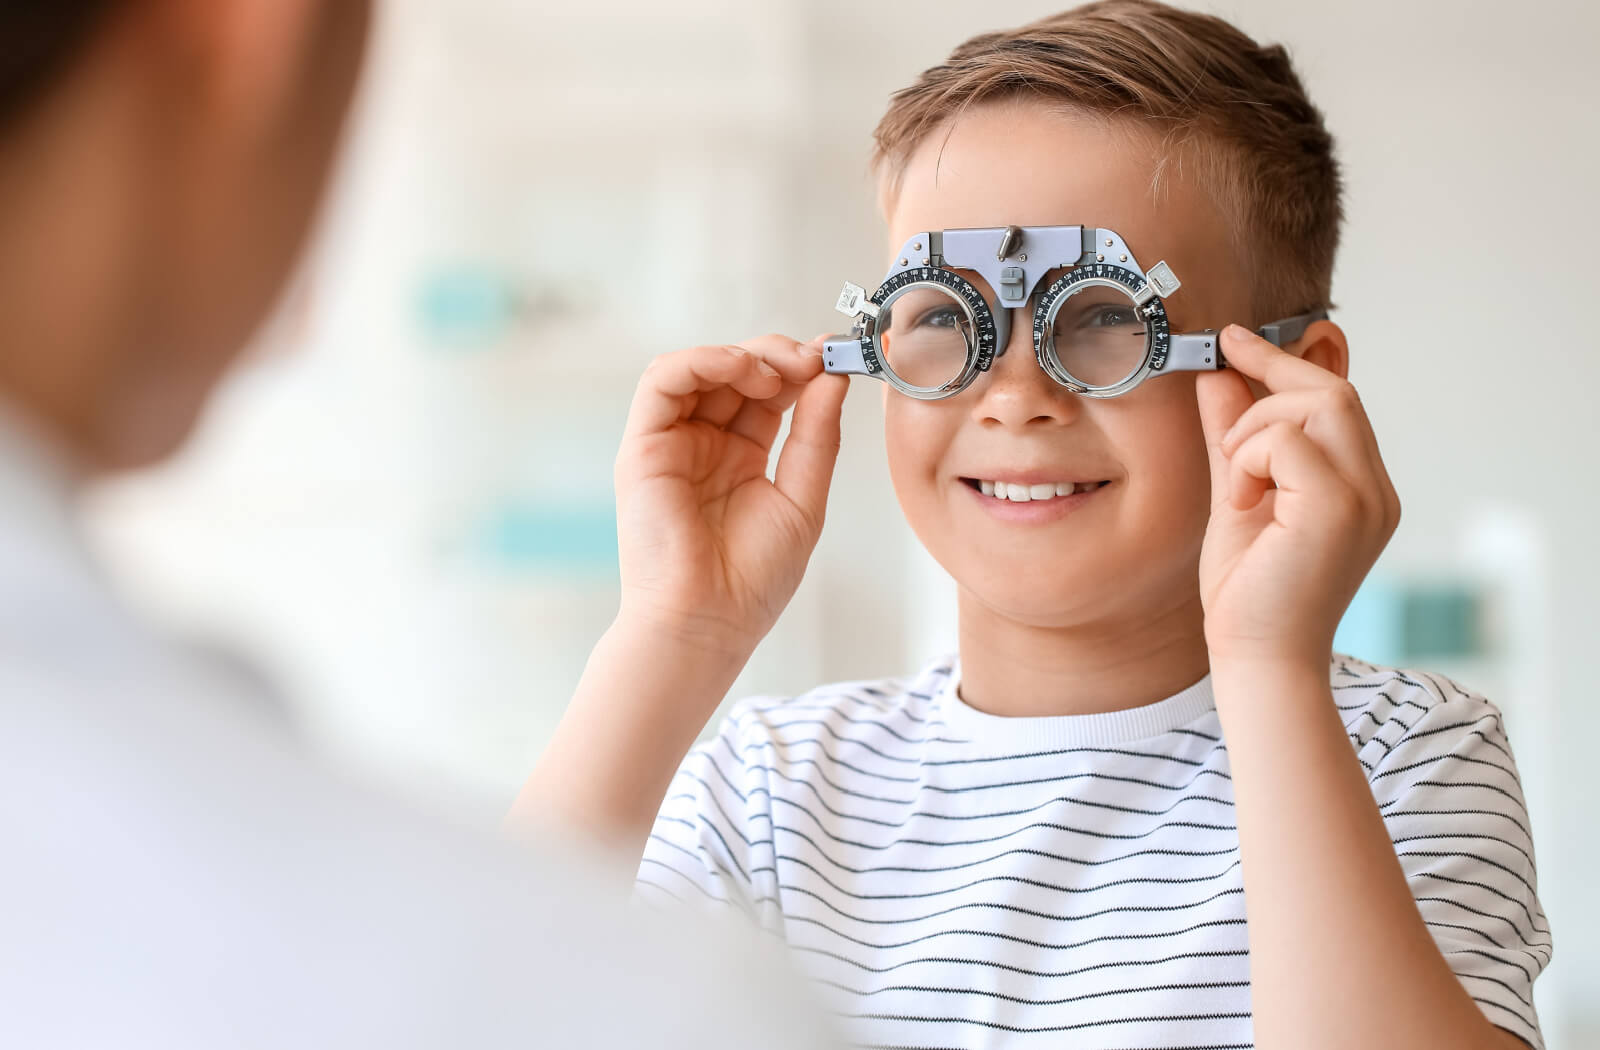 A young boy tests his vision through a lens tool at his eye doctor's office